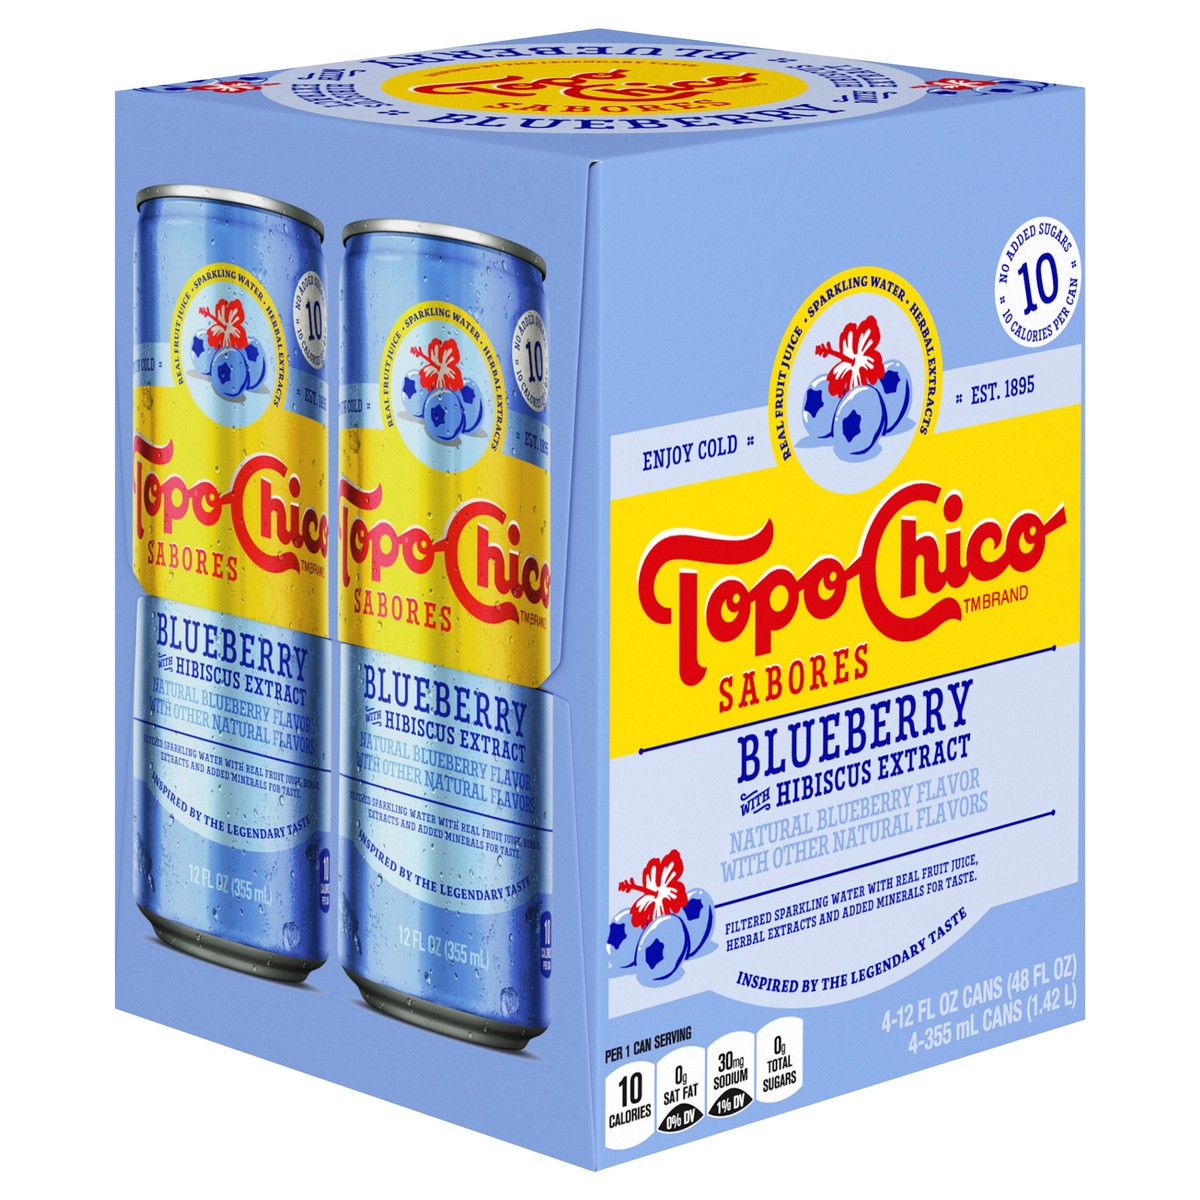 Topo Chico Free Hard Seltzer, 12 cans / 12 fl oz - Food 4 Less